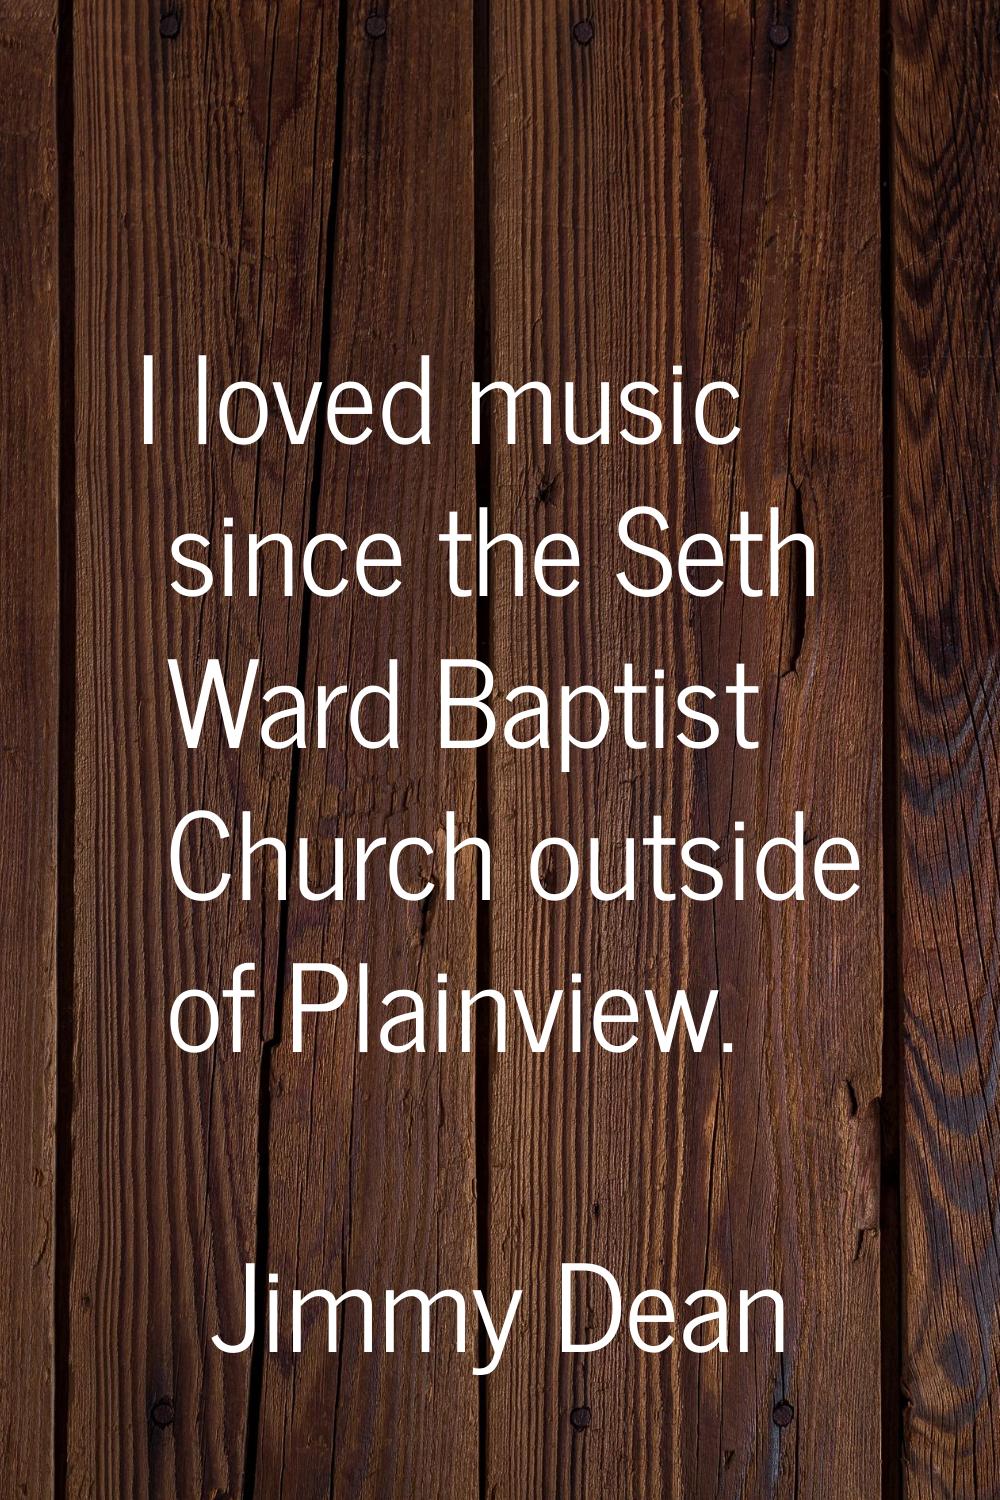 I loved music since the Seth Ward Baptist Church outside of Plainview.